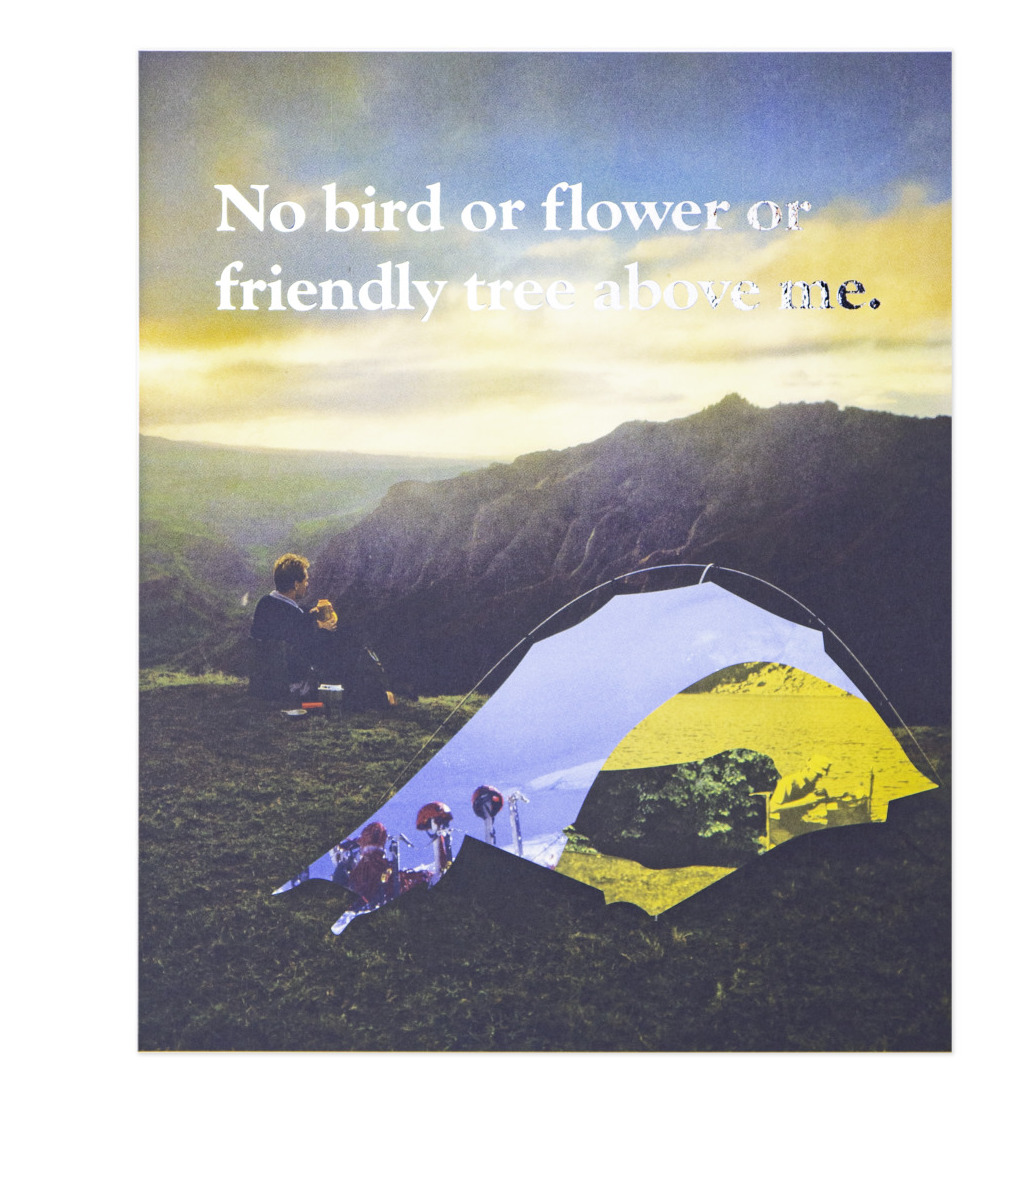 A faux poster image of a man next to a tent looking at a mountainous vista. The text says "No bird or flower or friendly tree above me."